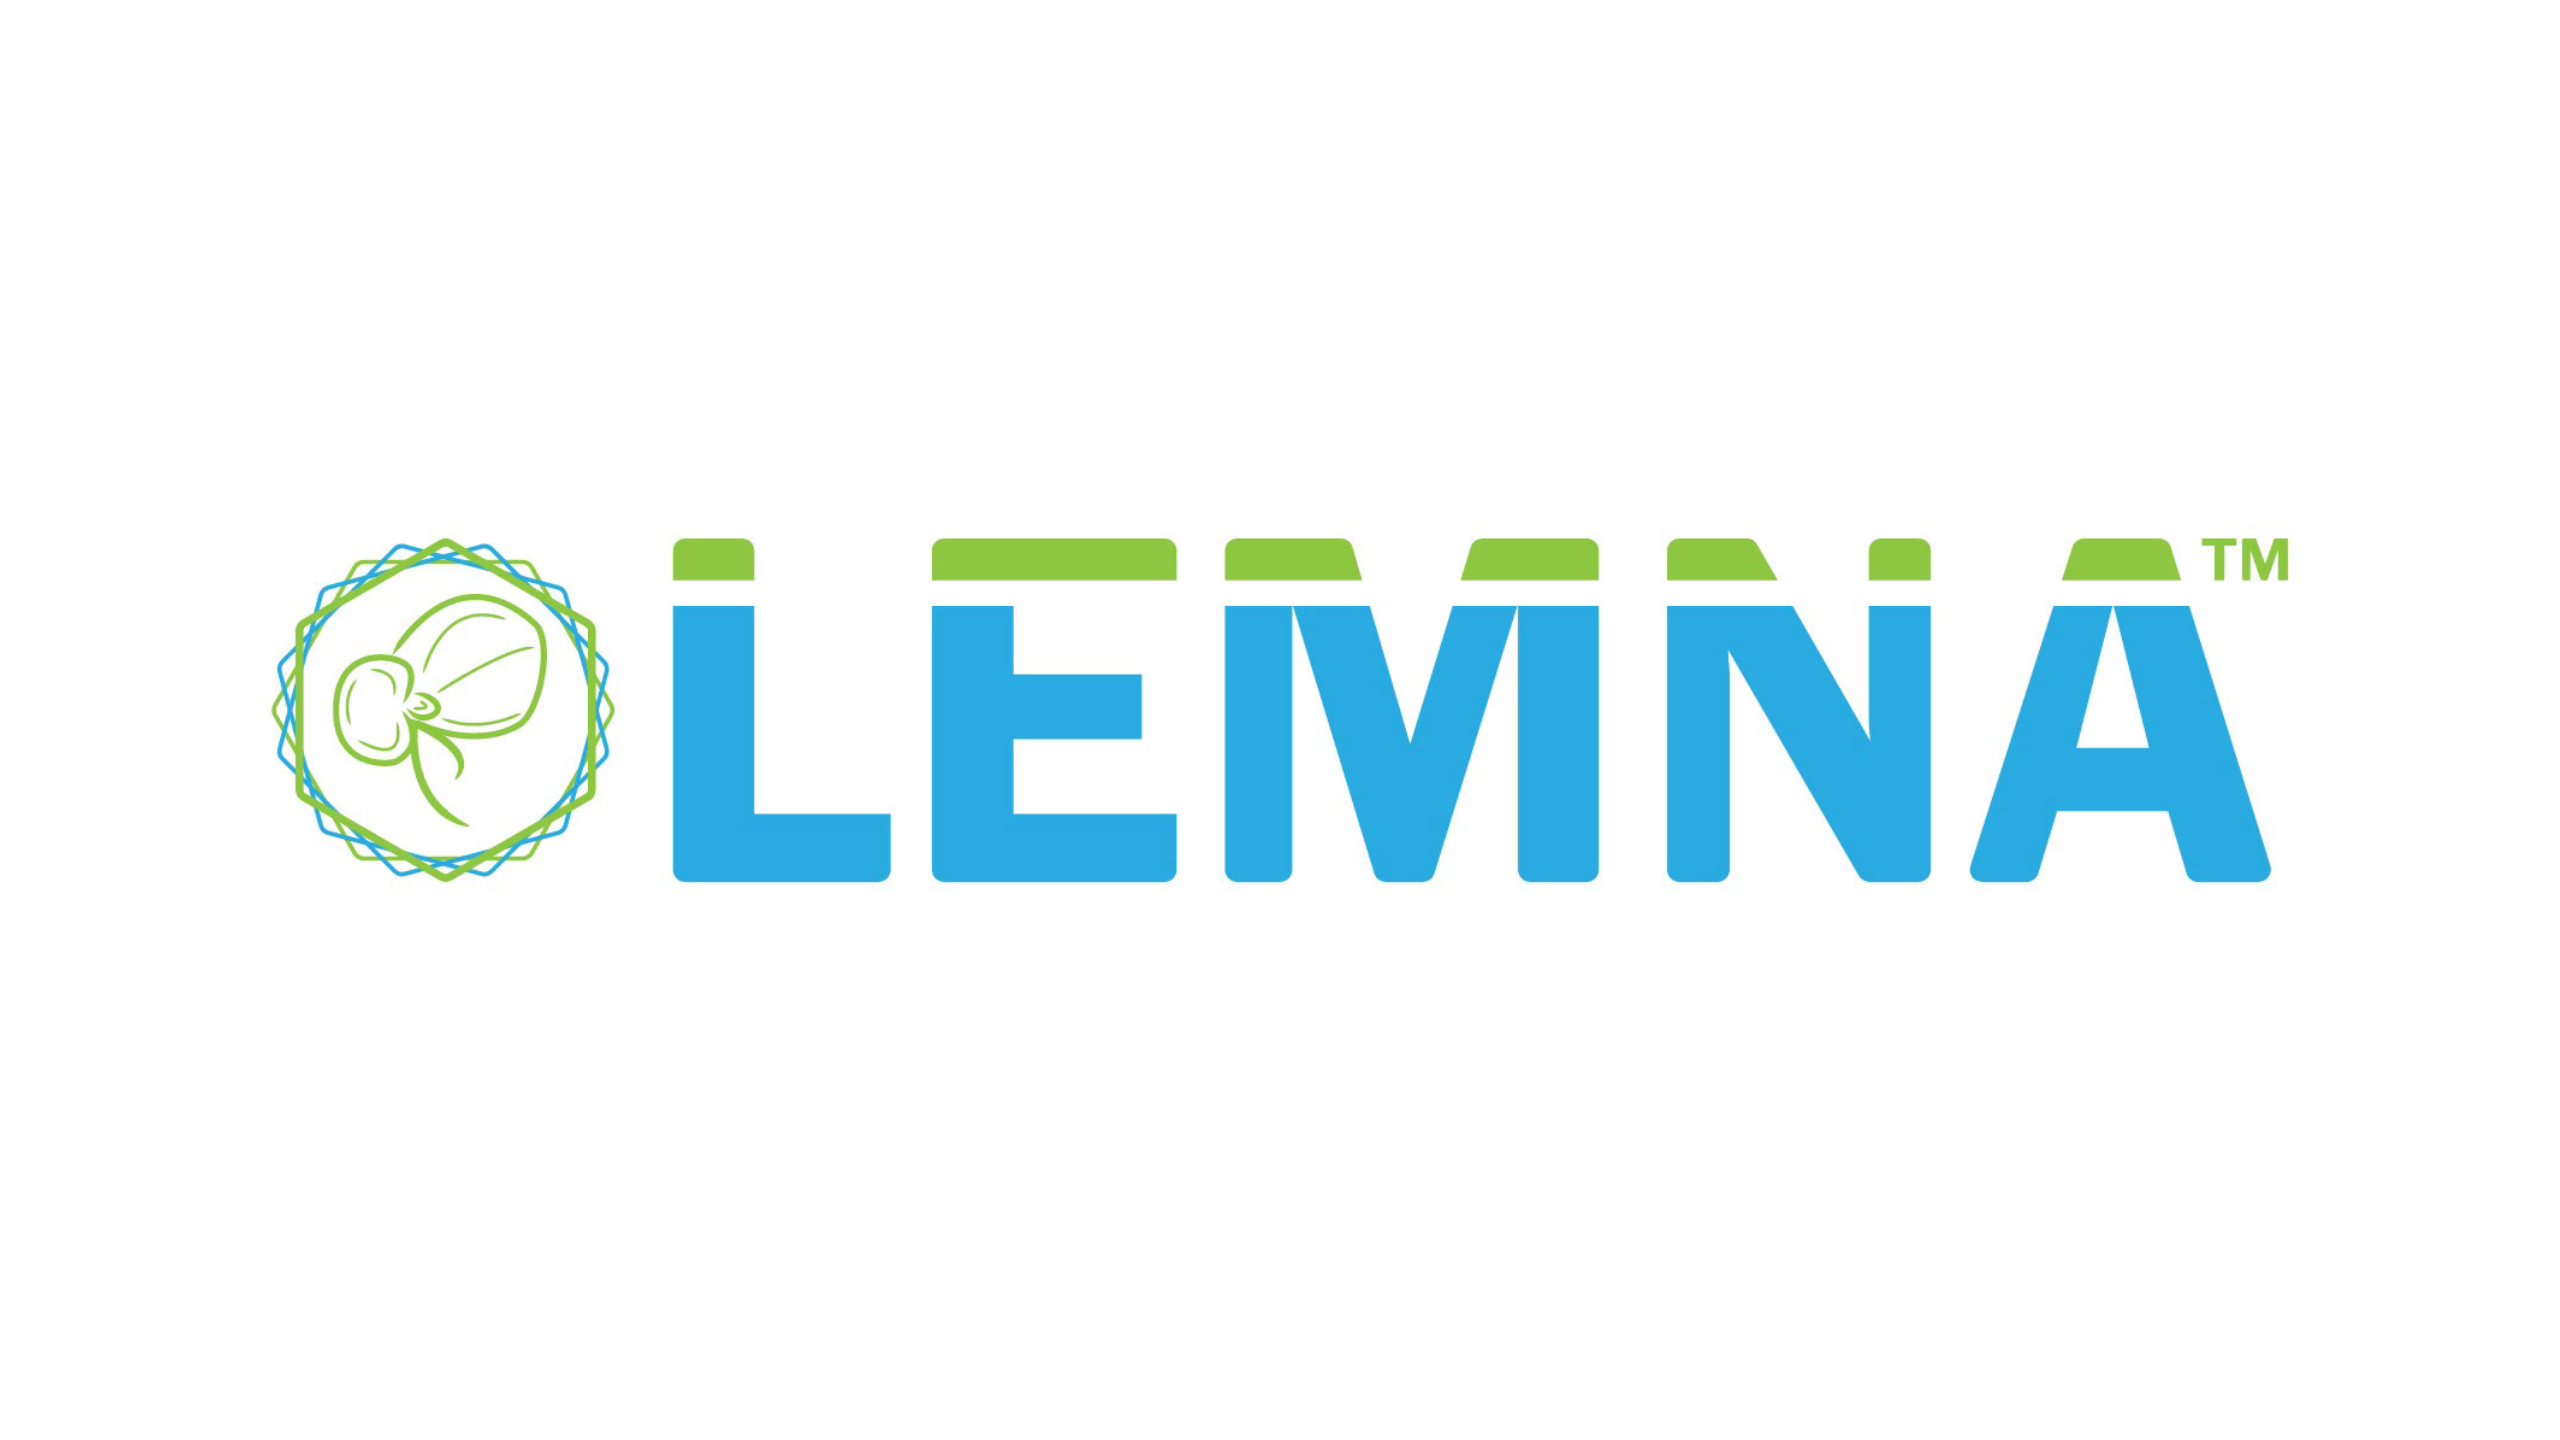 This is a photo of the Lemna logo.